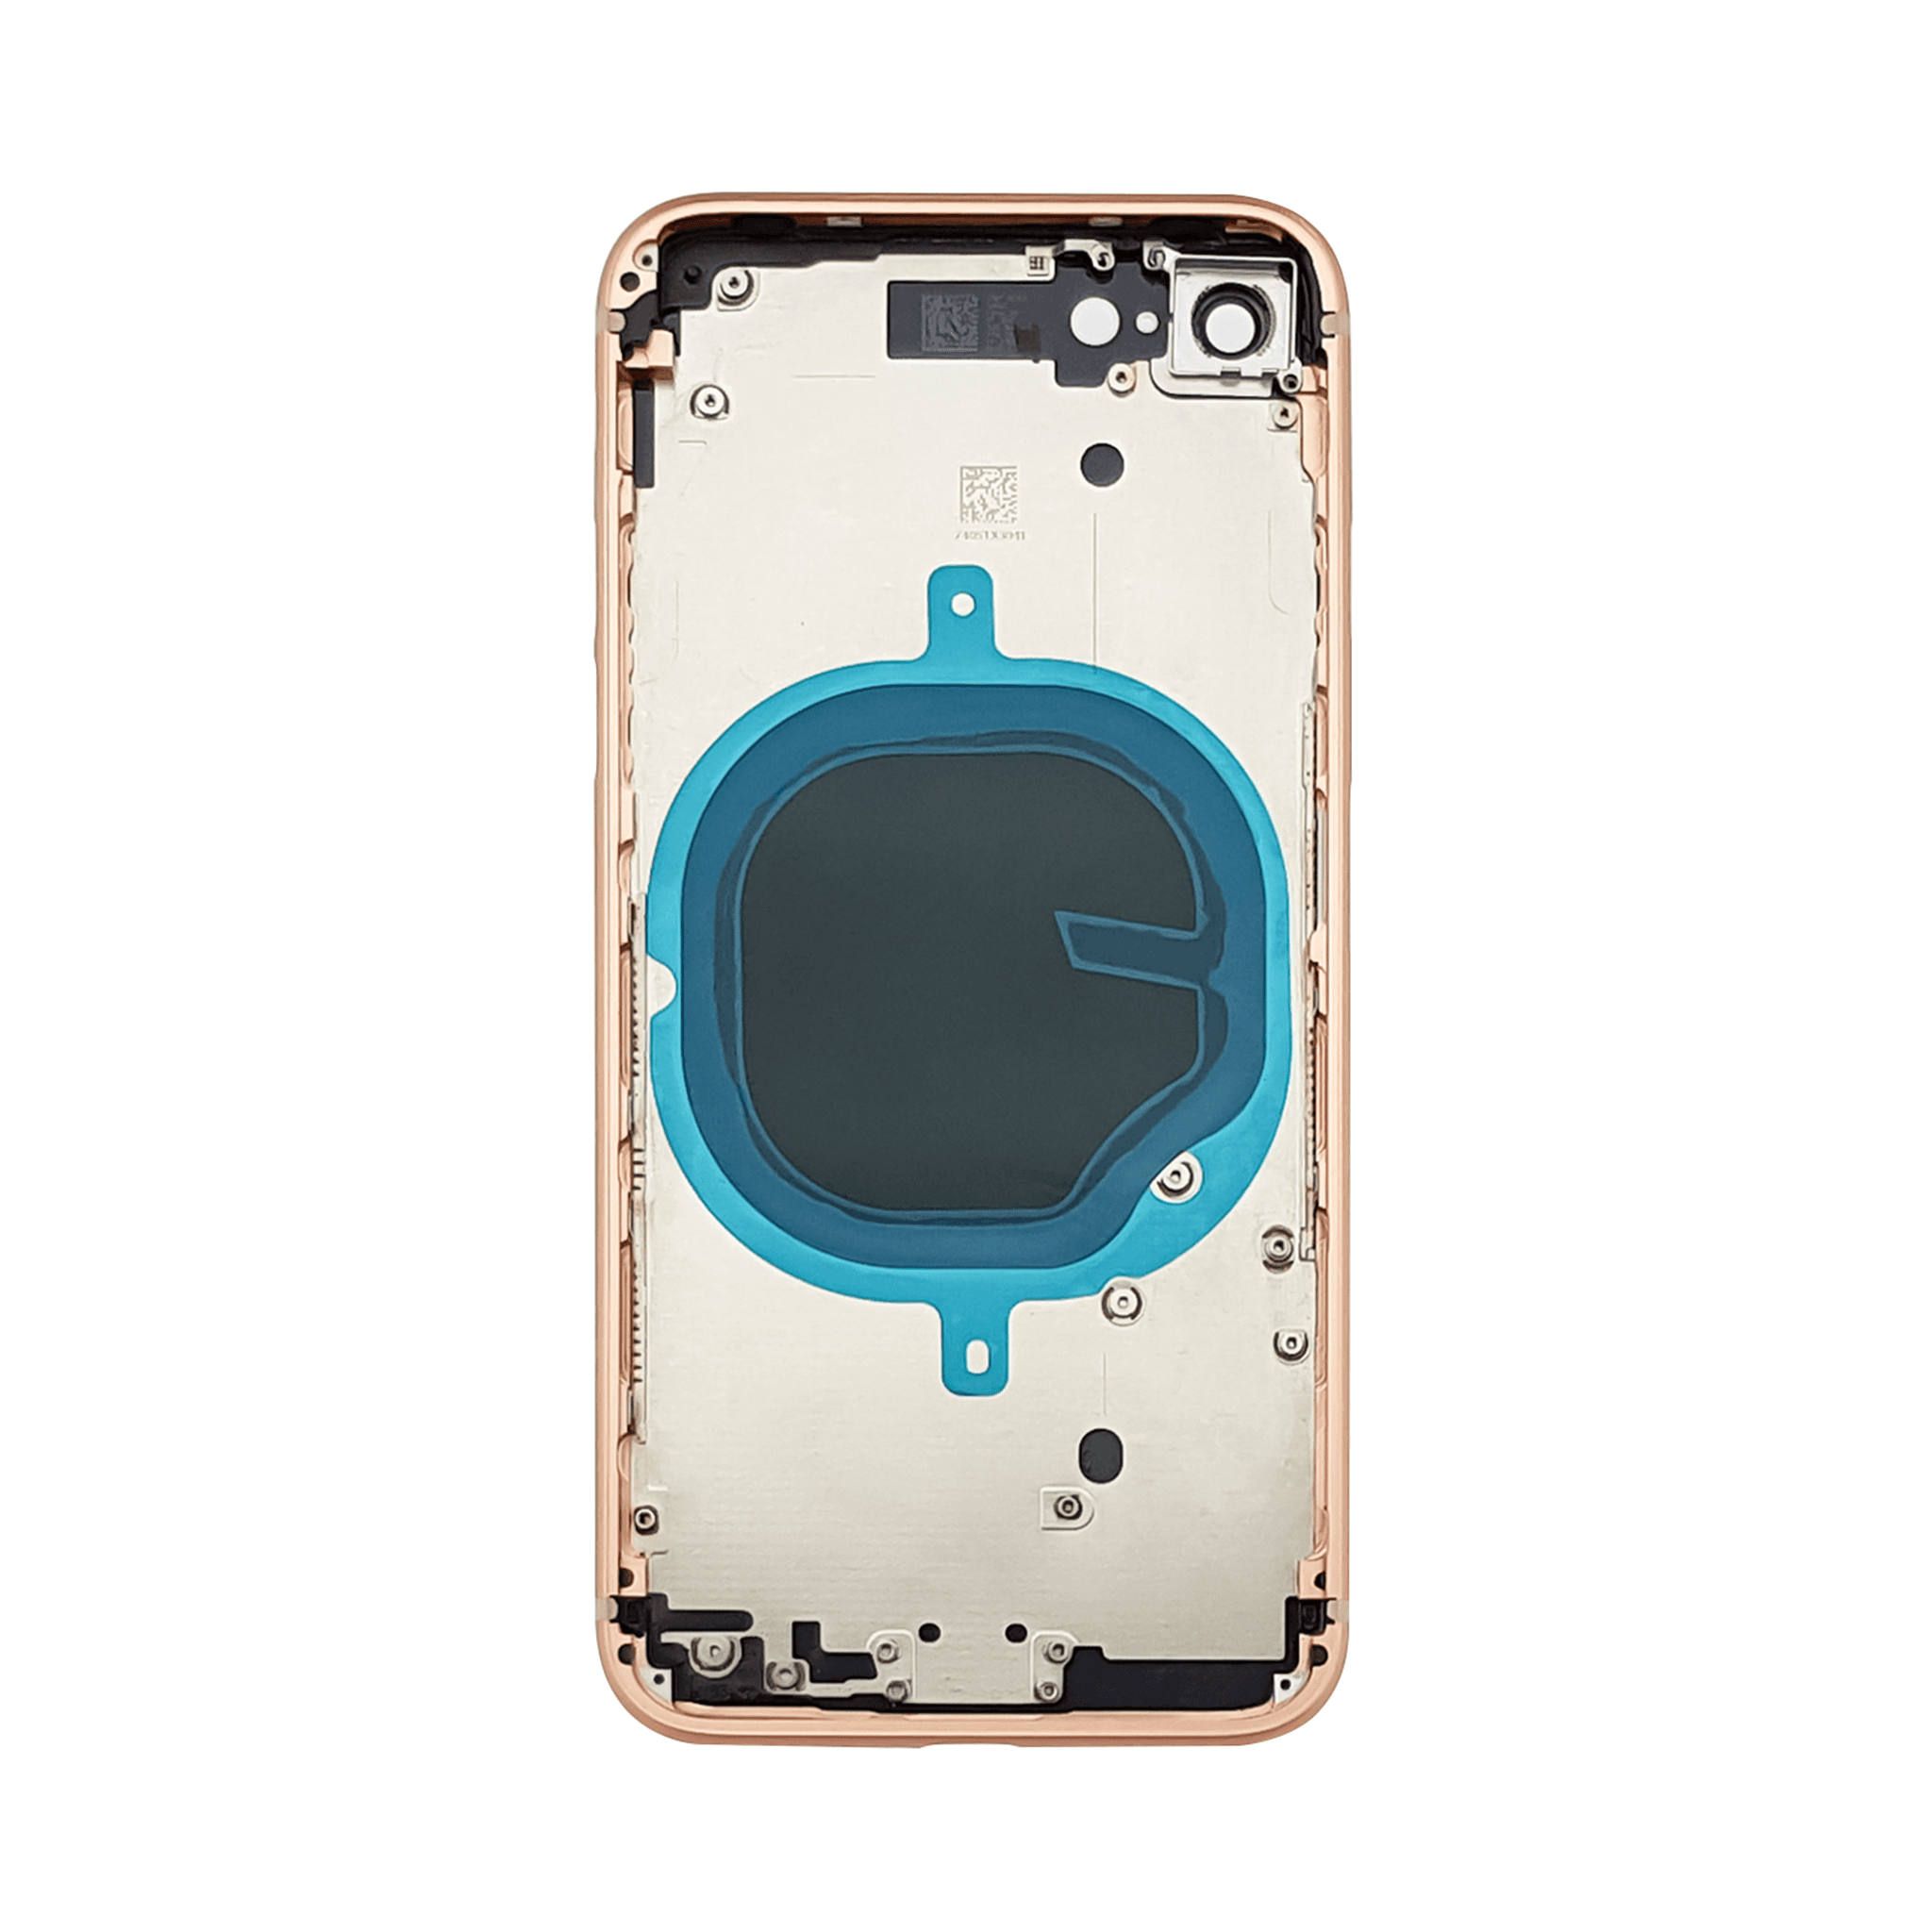 Body + battery cover iPhone 8 rose gold